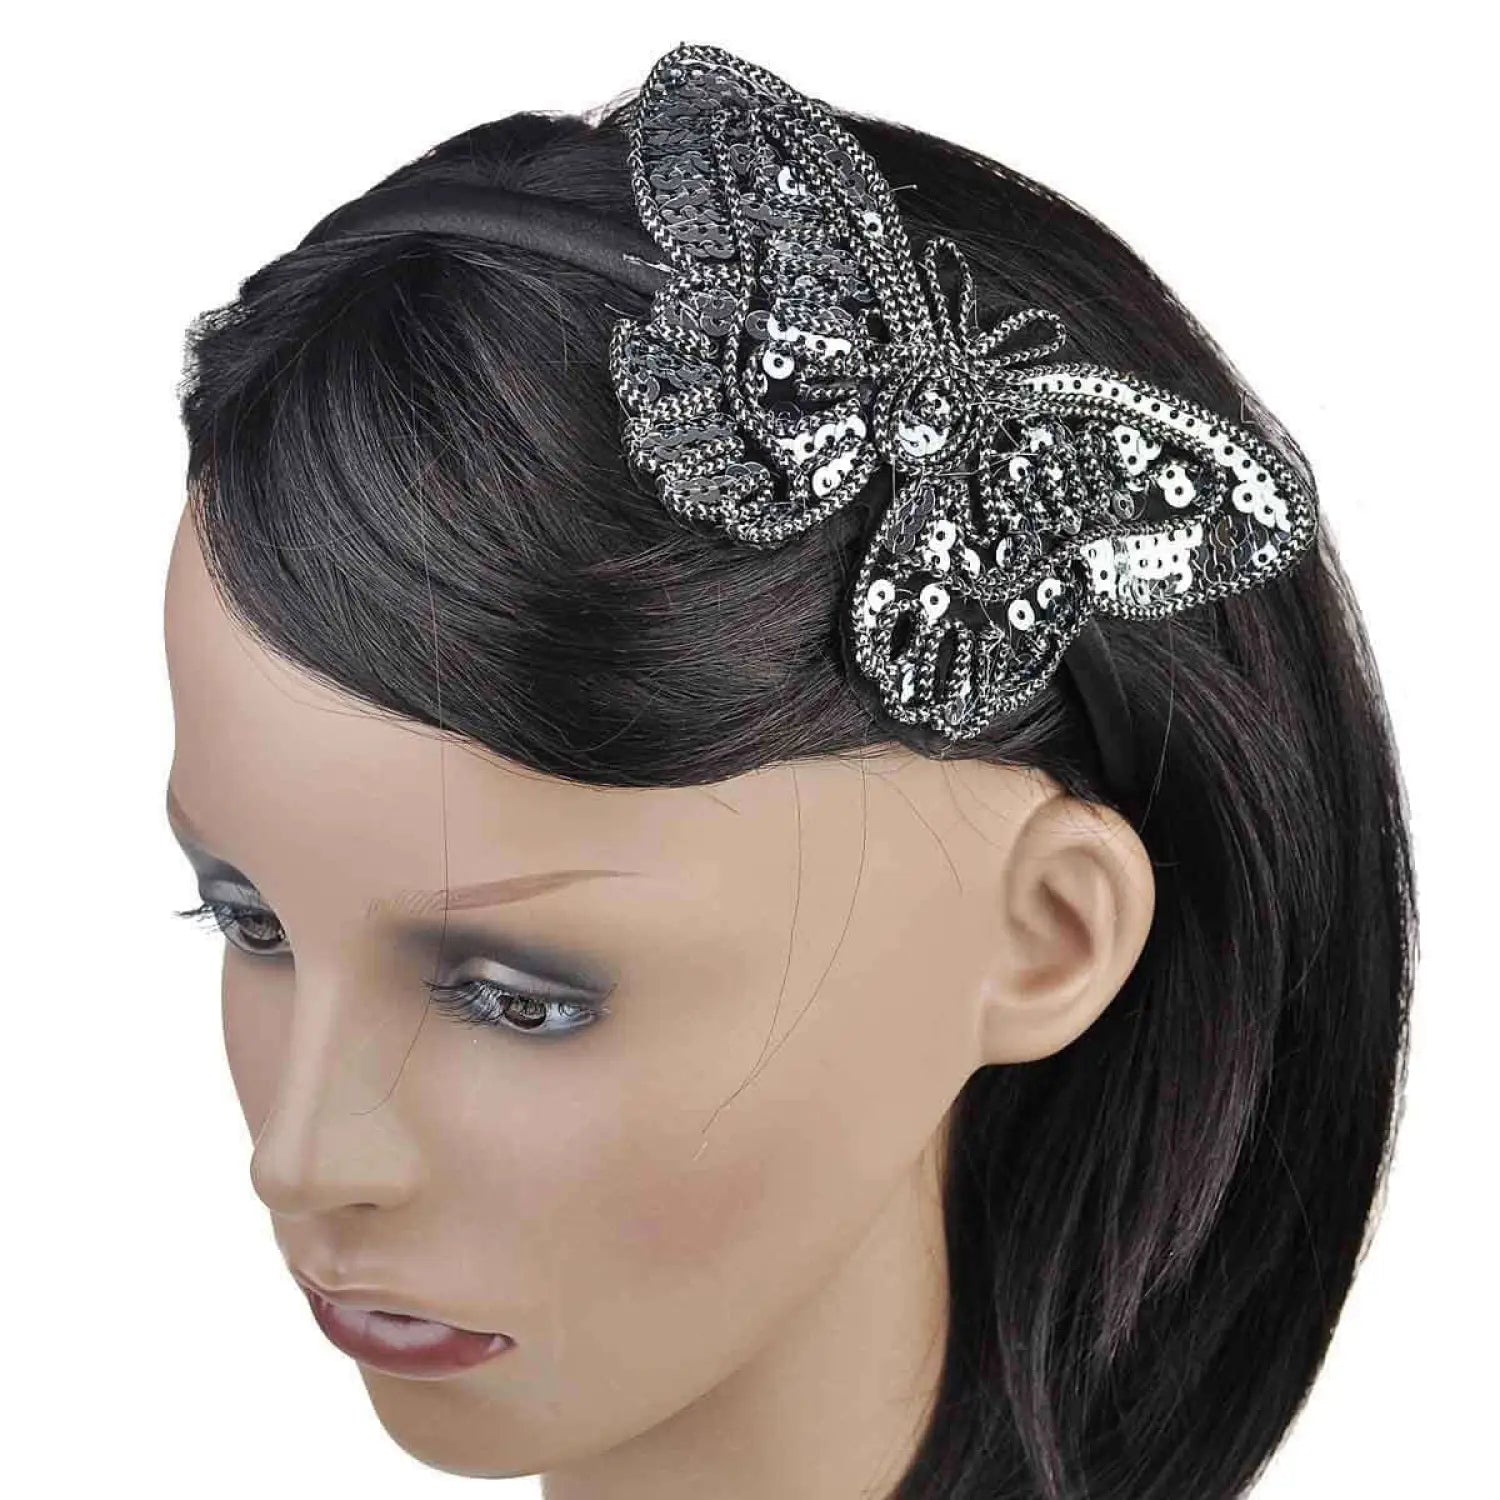 Woman wearing black and white butterfly Alice headband with sequins and spangles.